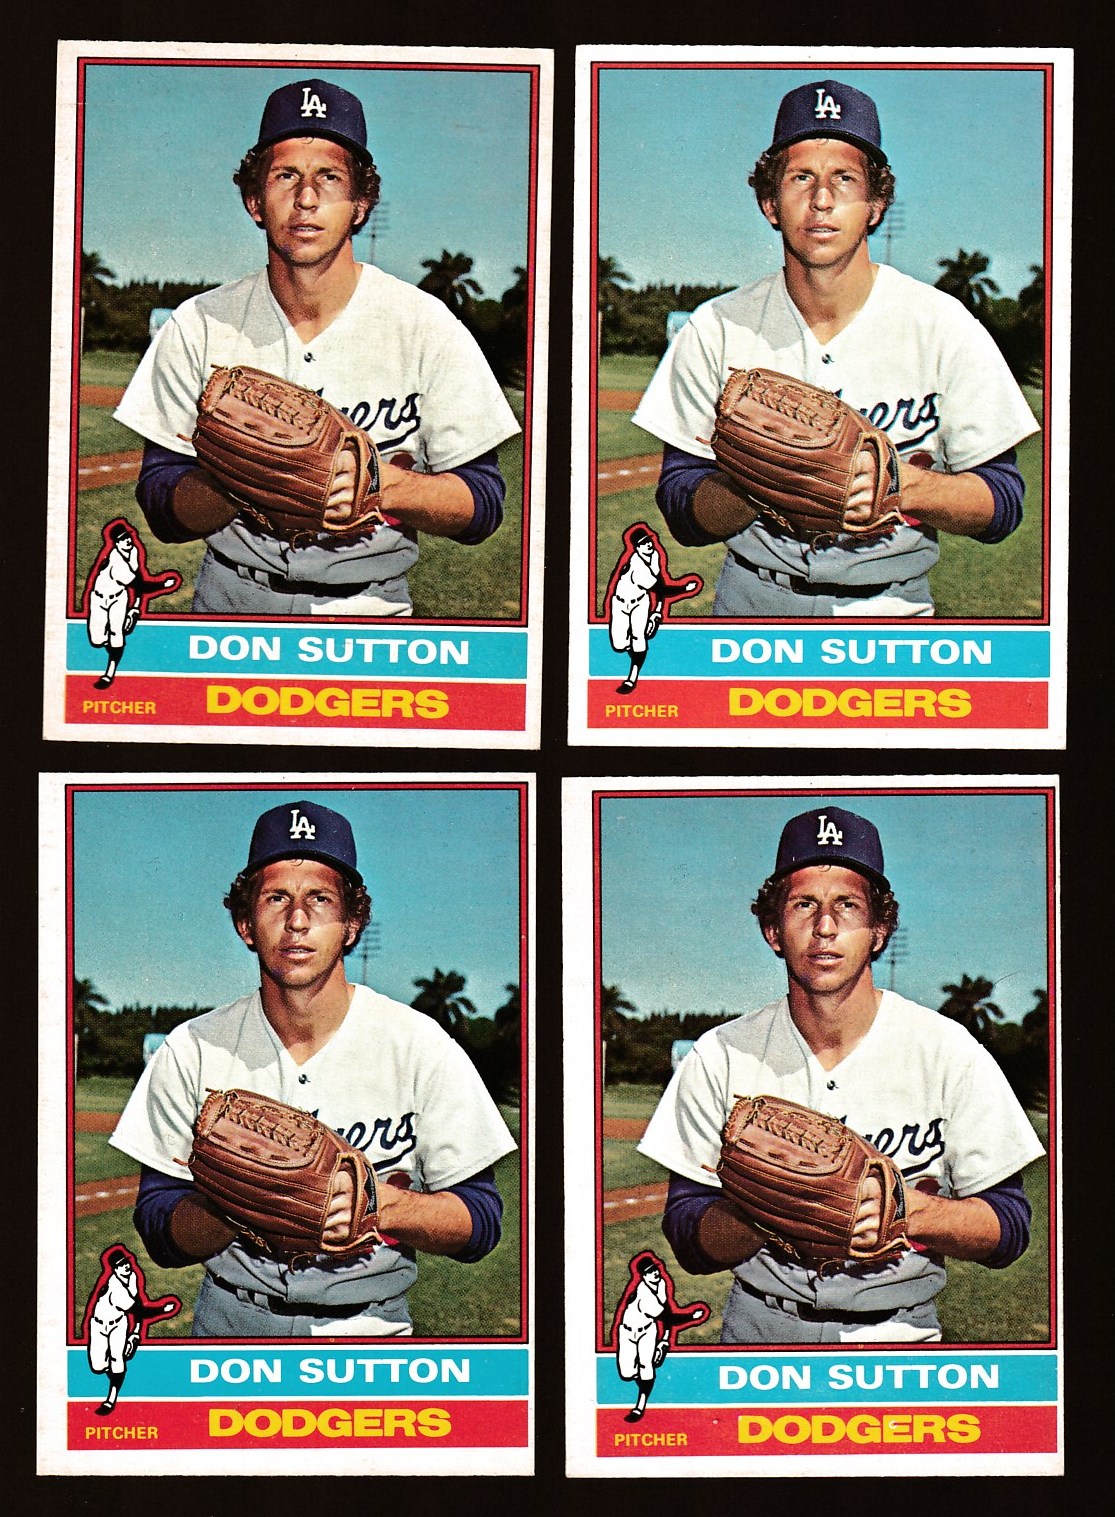 1976 O-Pee-Chee/OPC #530 Don Sutton (Dodgers) Baseball cards value